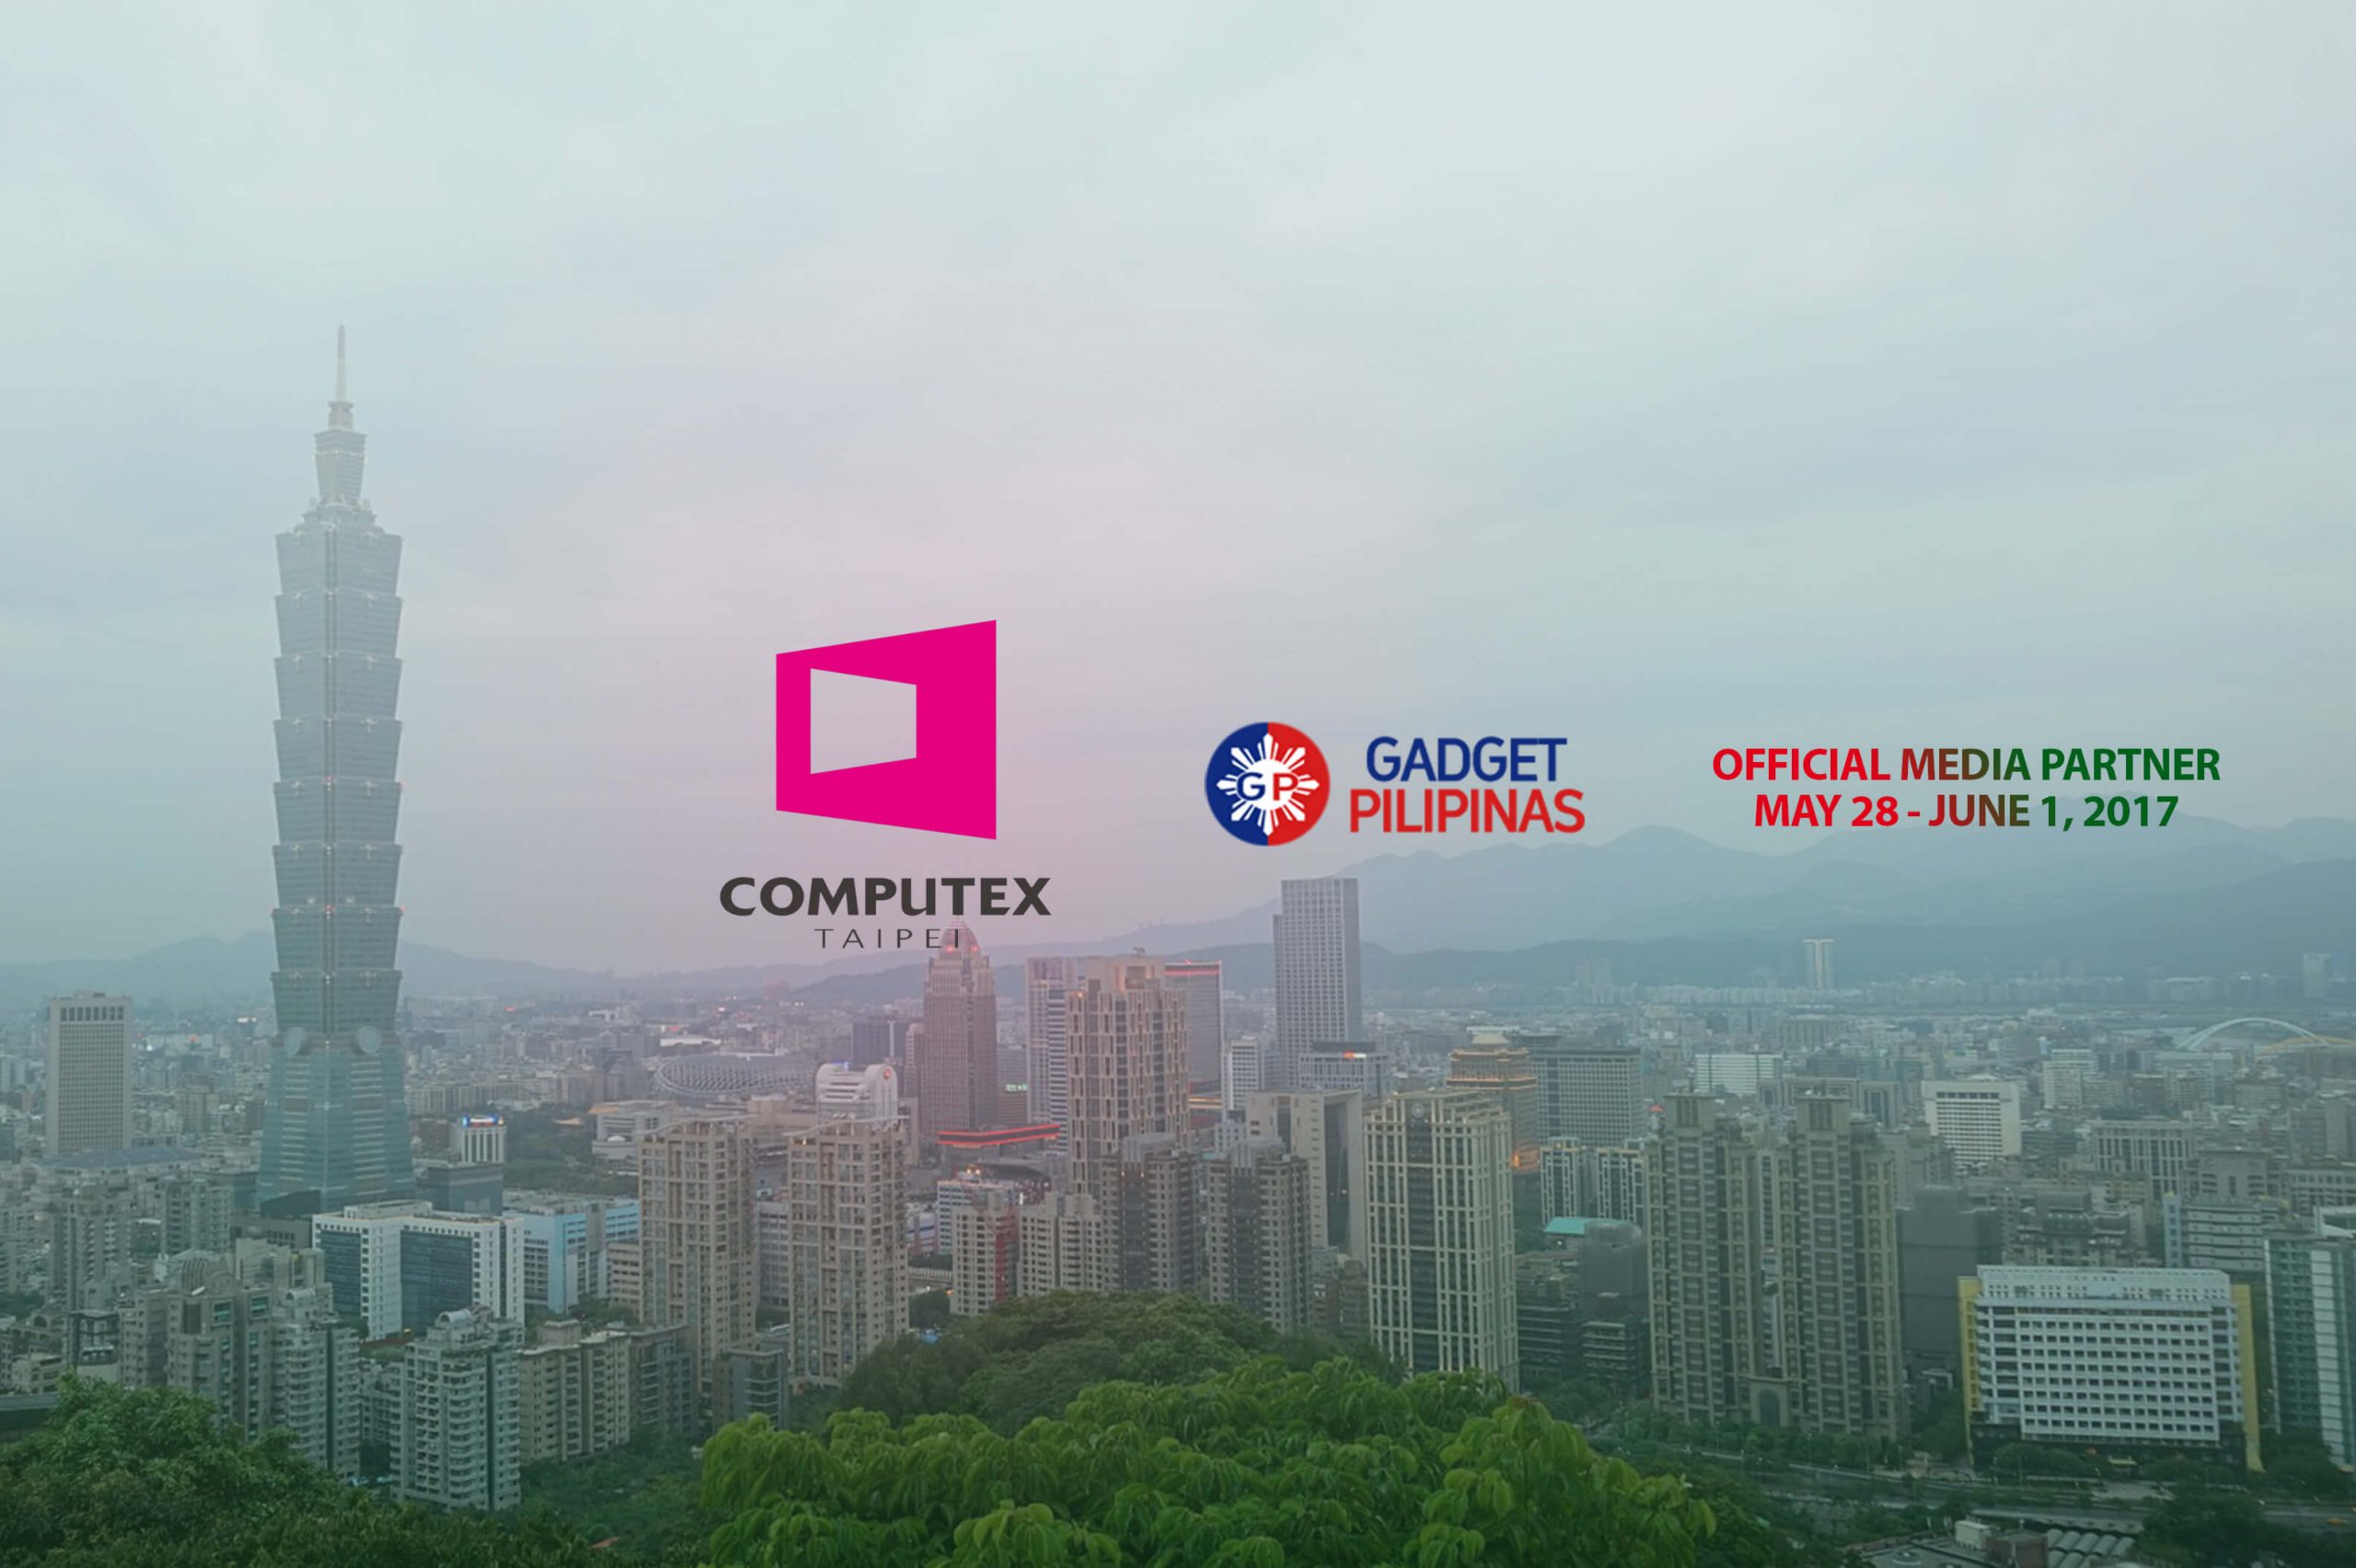 Gadget Pilipinas is going to Computex Taiwan 2017 as Official Media Partner